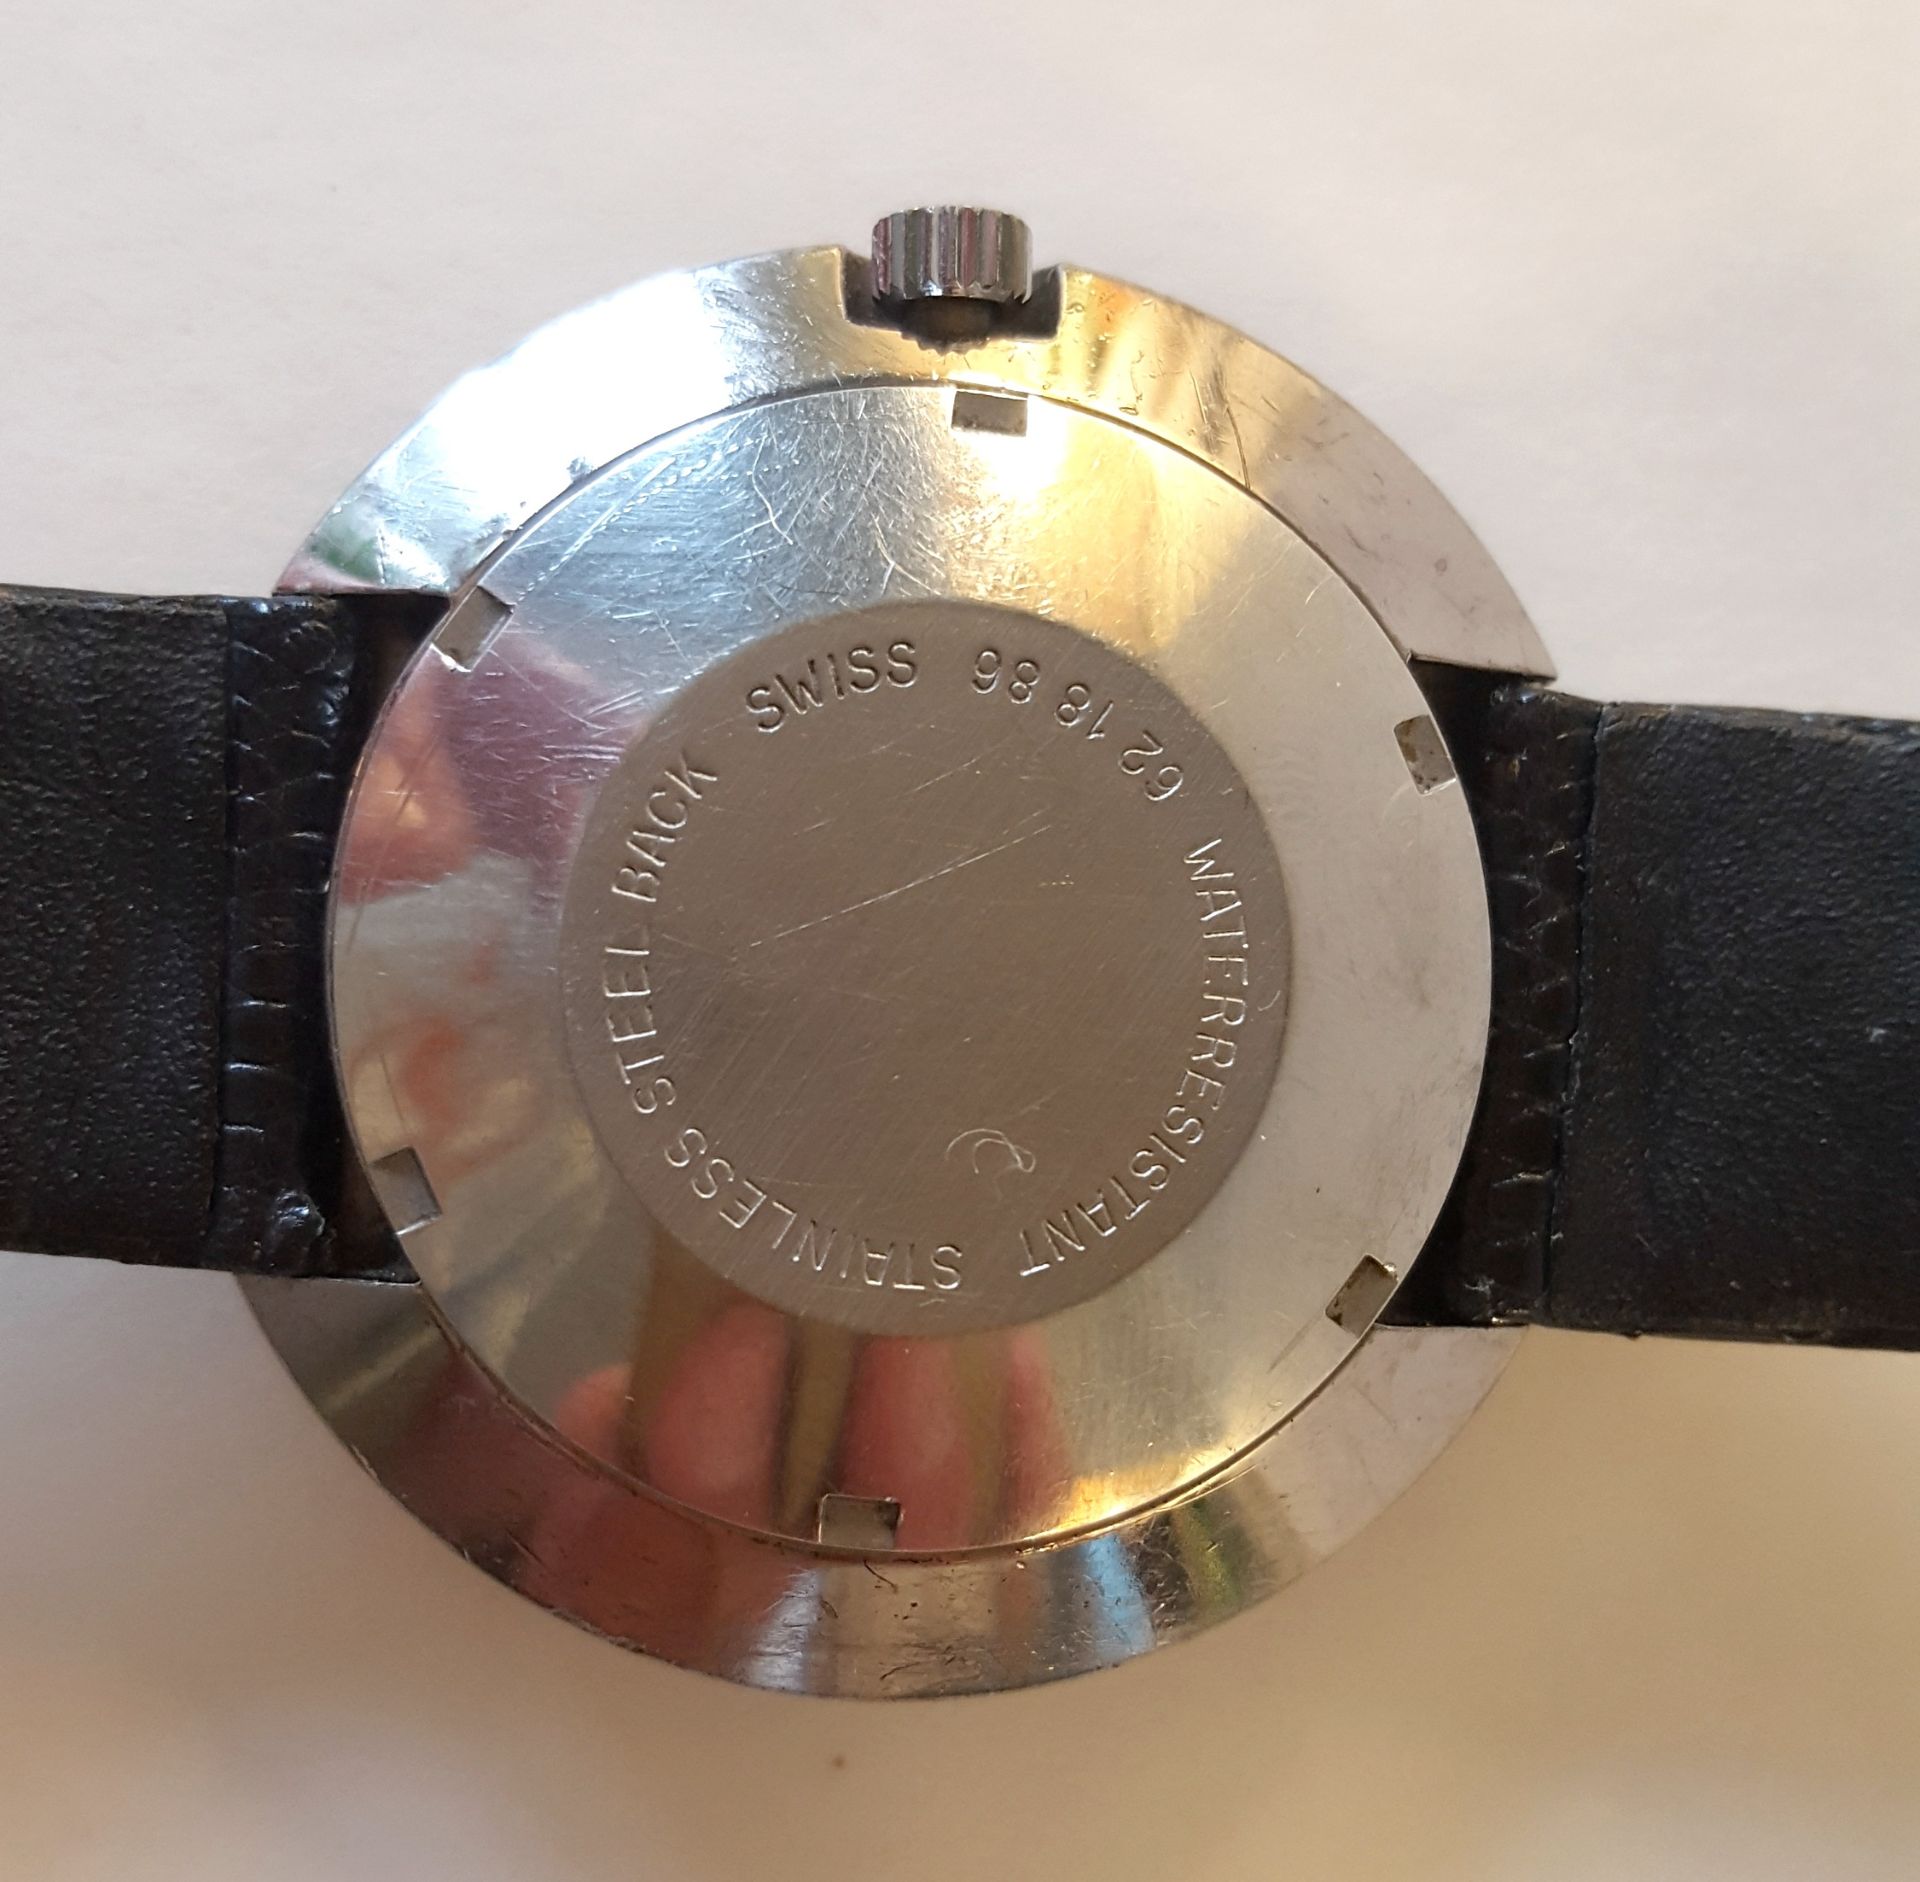 Vintage Retro Rotary Wrist Watch Stainless Steel Space Helmet Design Fully Automatic Working - Image 3 of 3